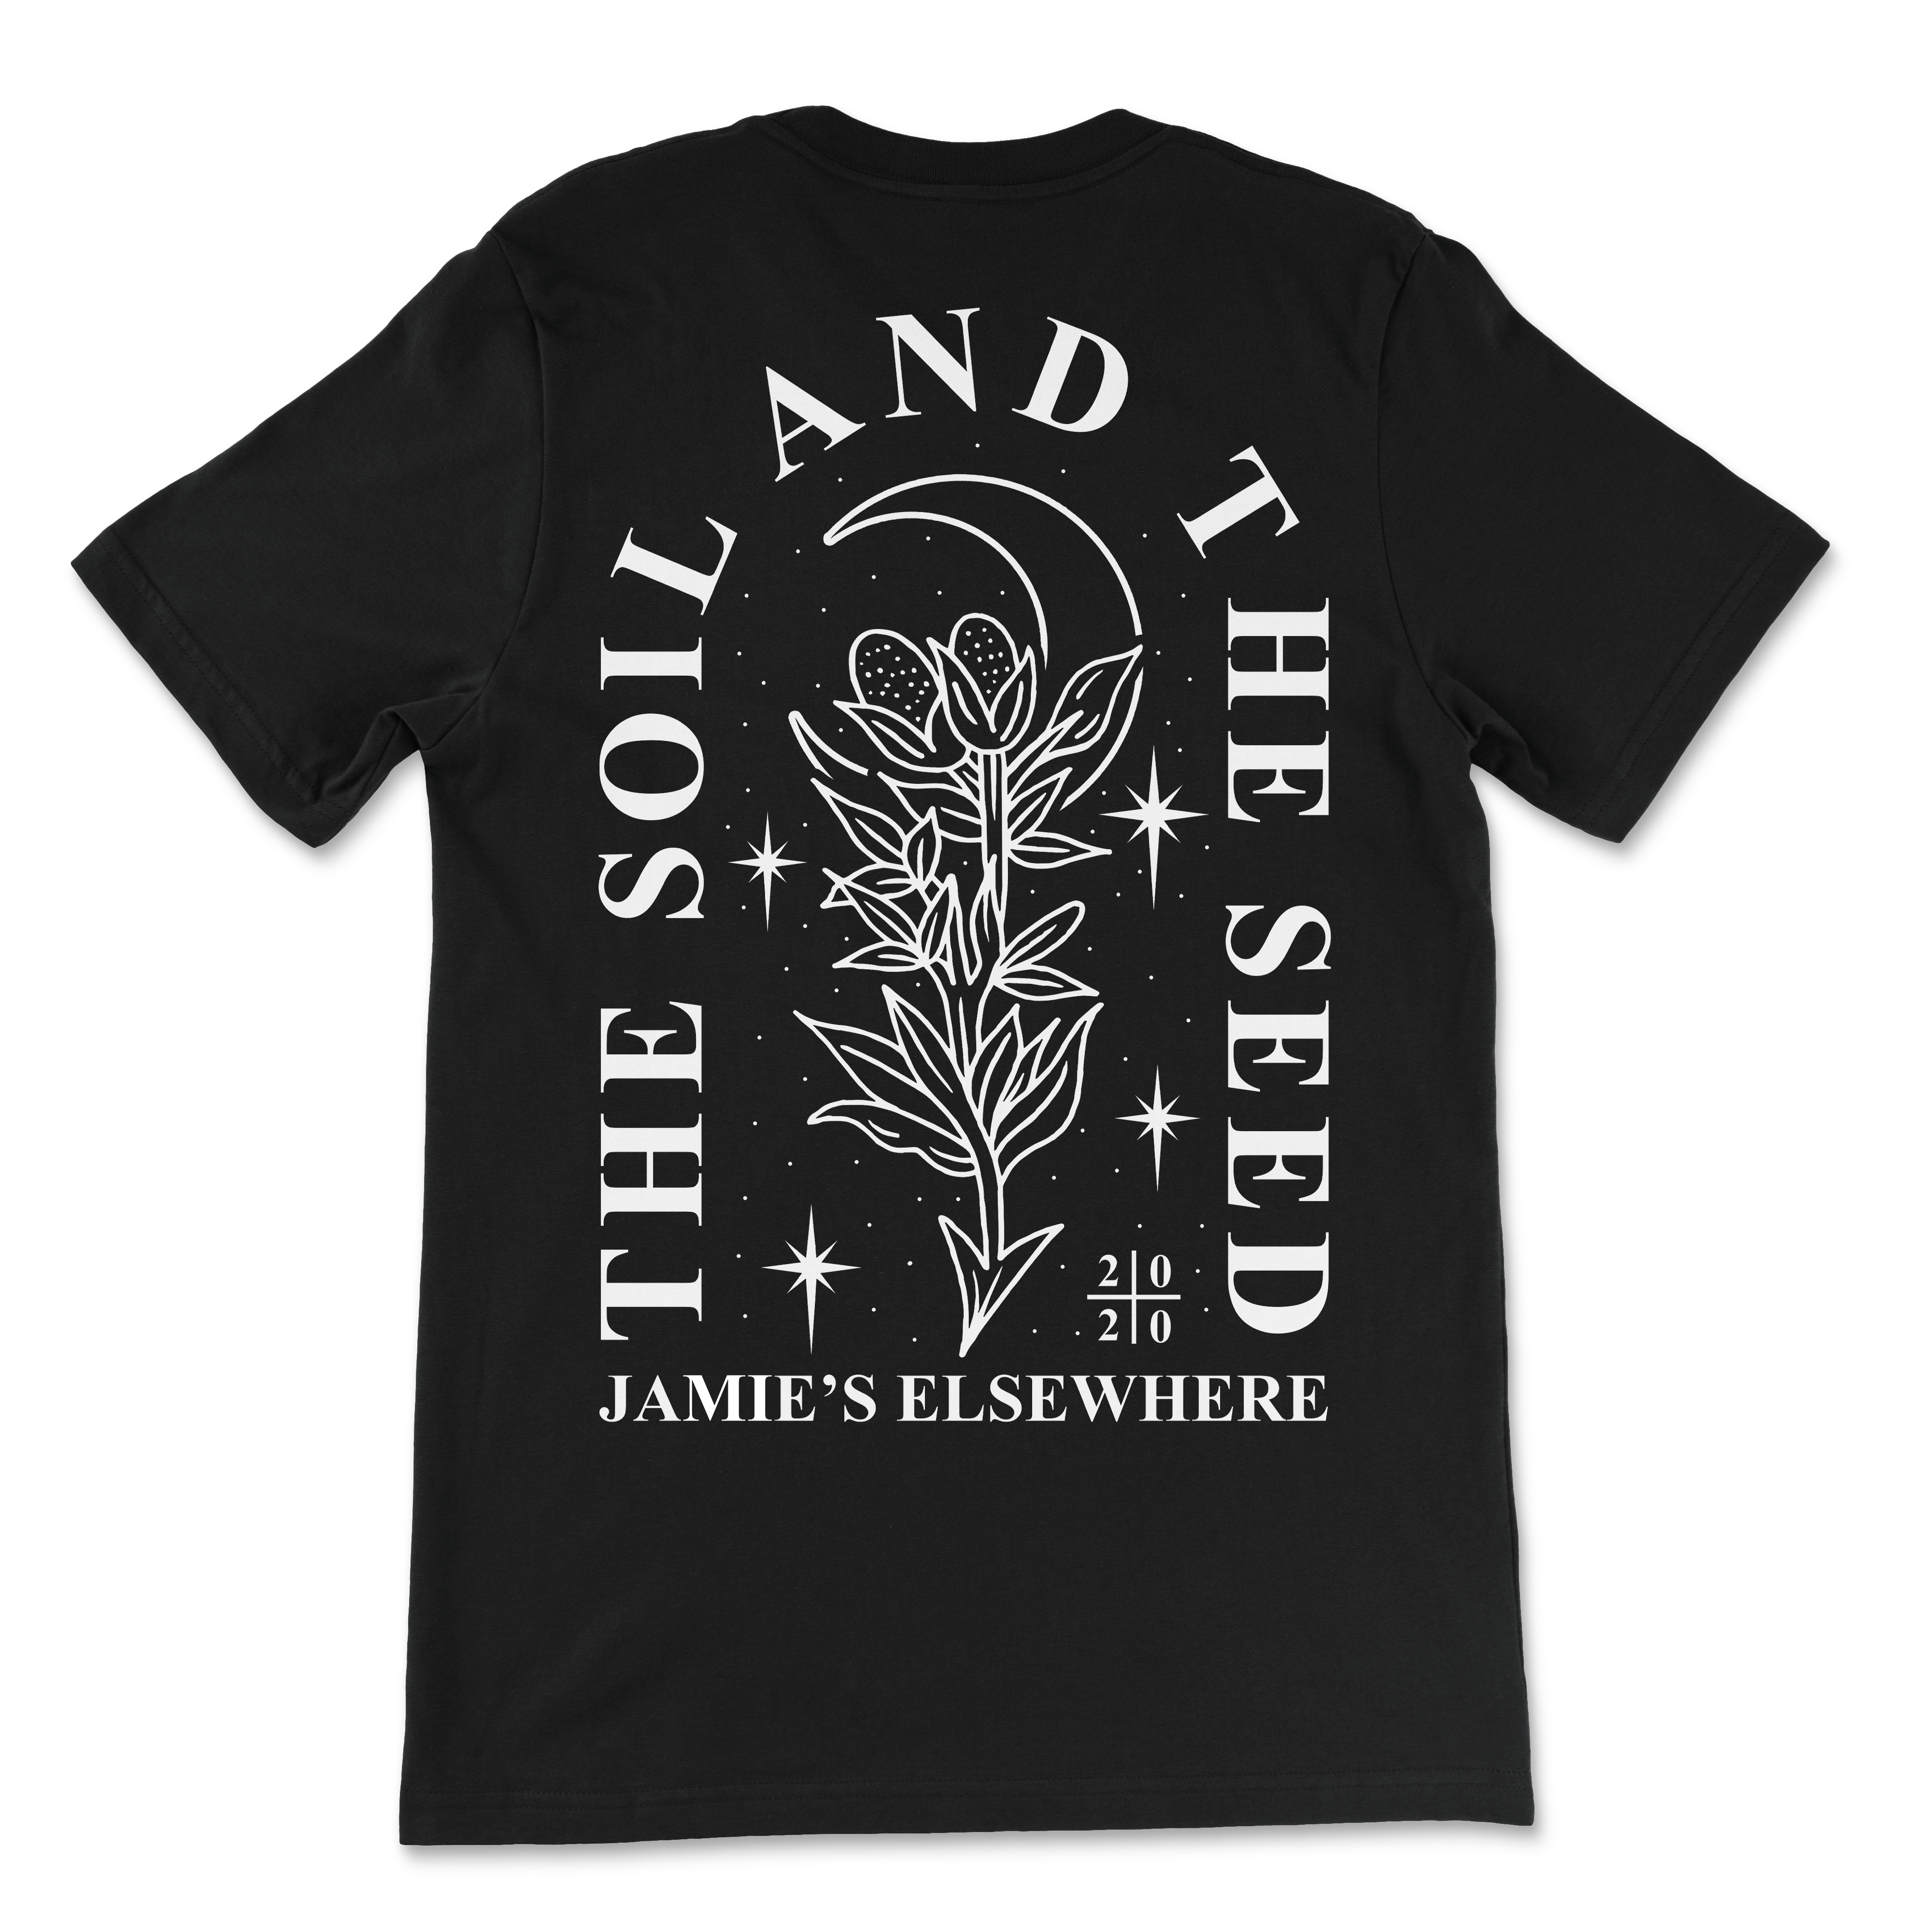 Jamie's Elsewhere - The Soil And The Seed Tee